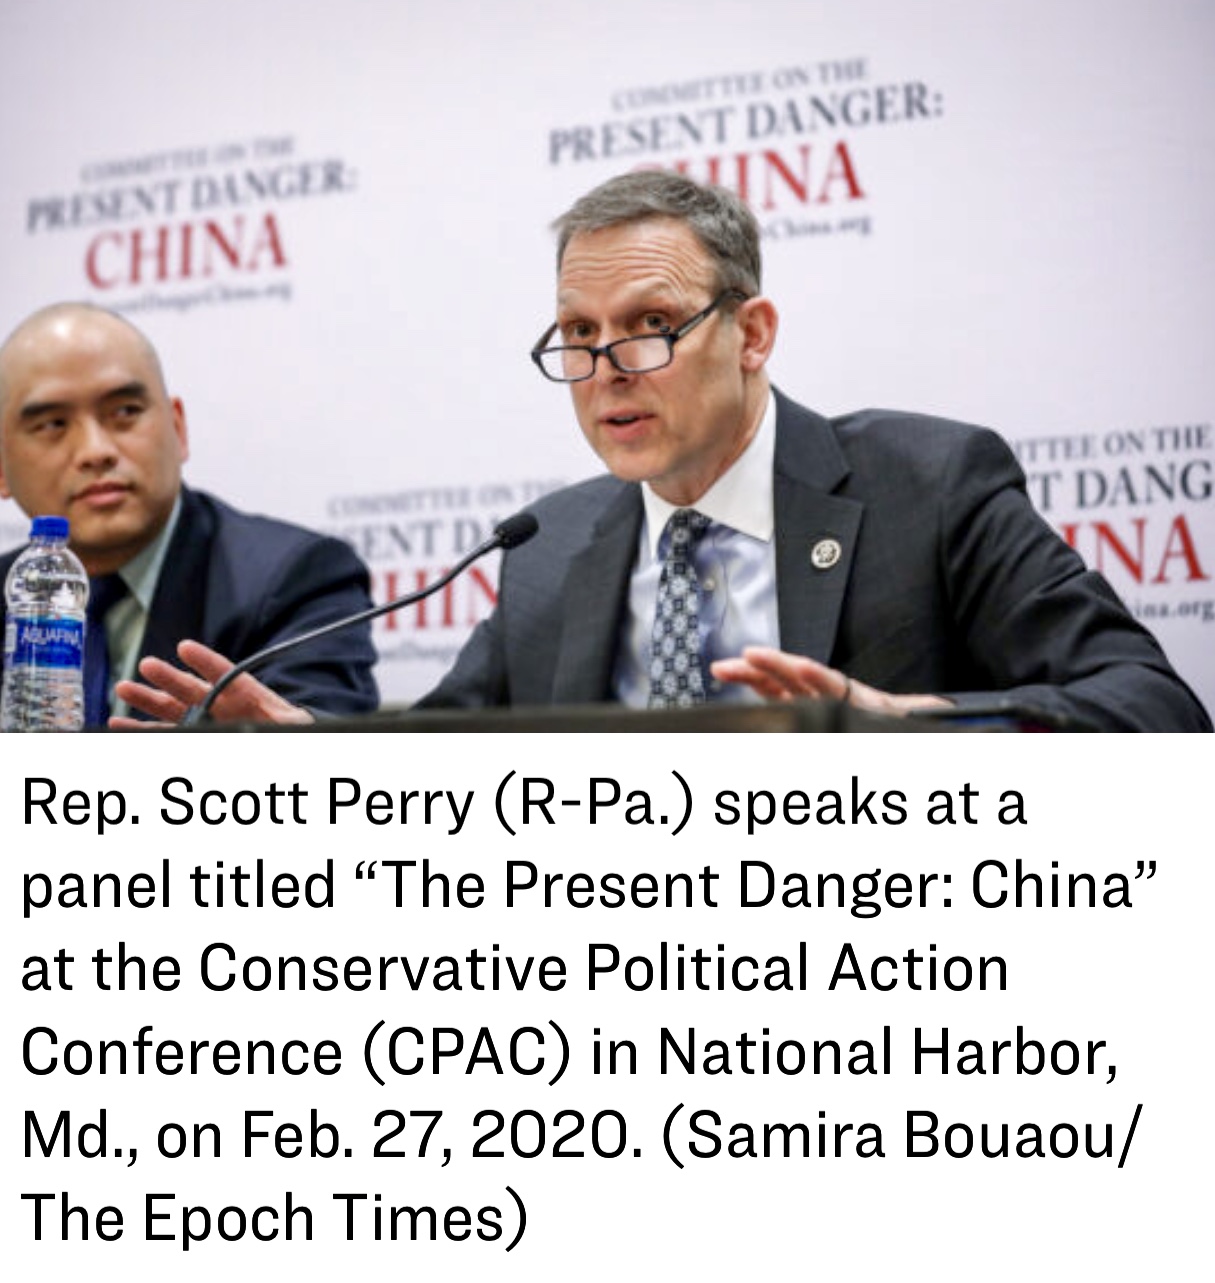 At CPAC Experts Warn The Present Danger is China